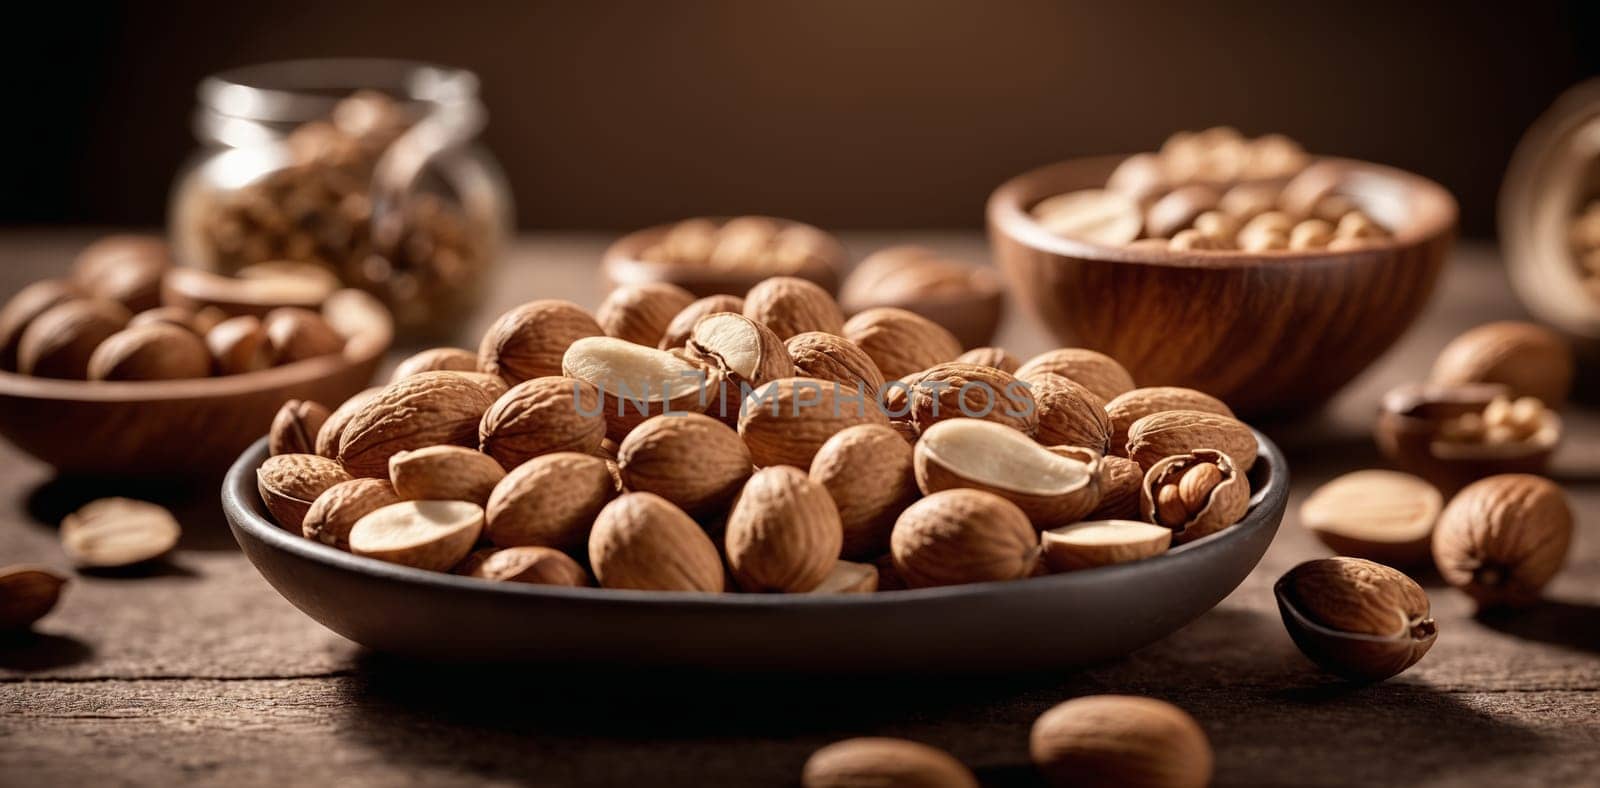 Whole Almonds on Wooden Surface by Andre1ns